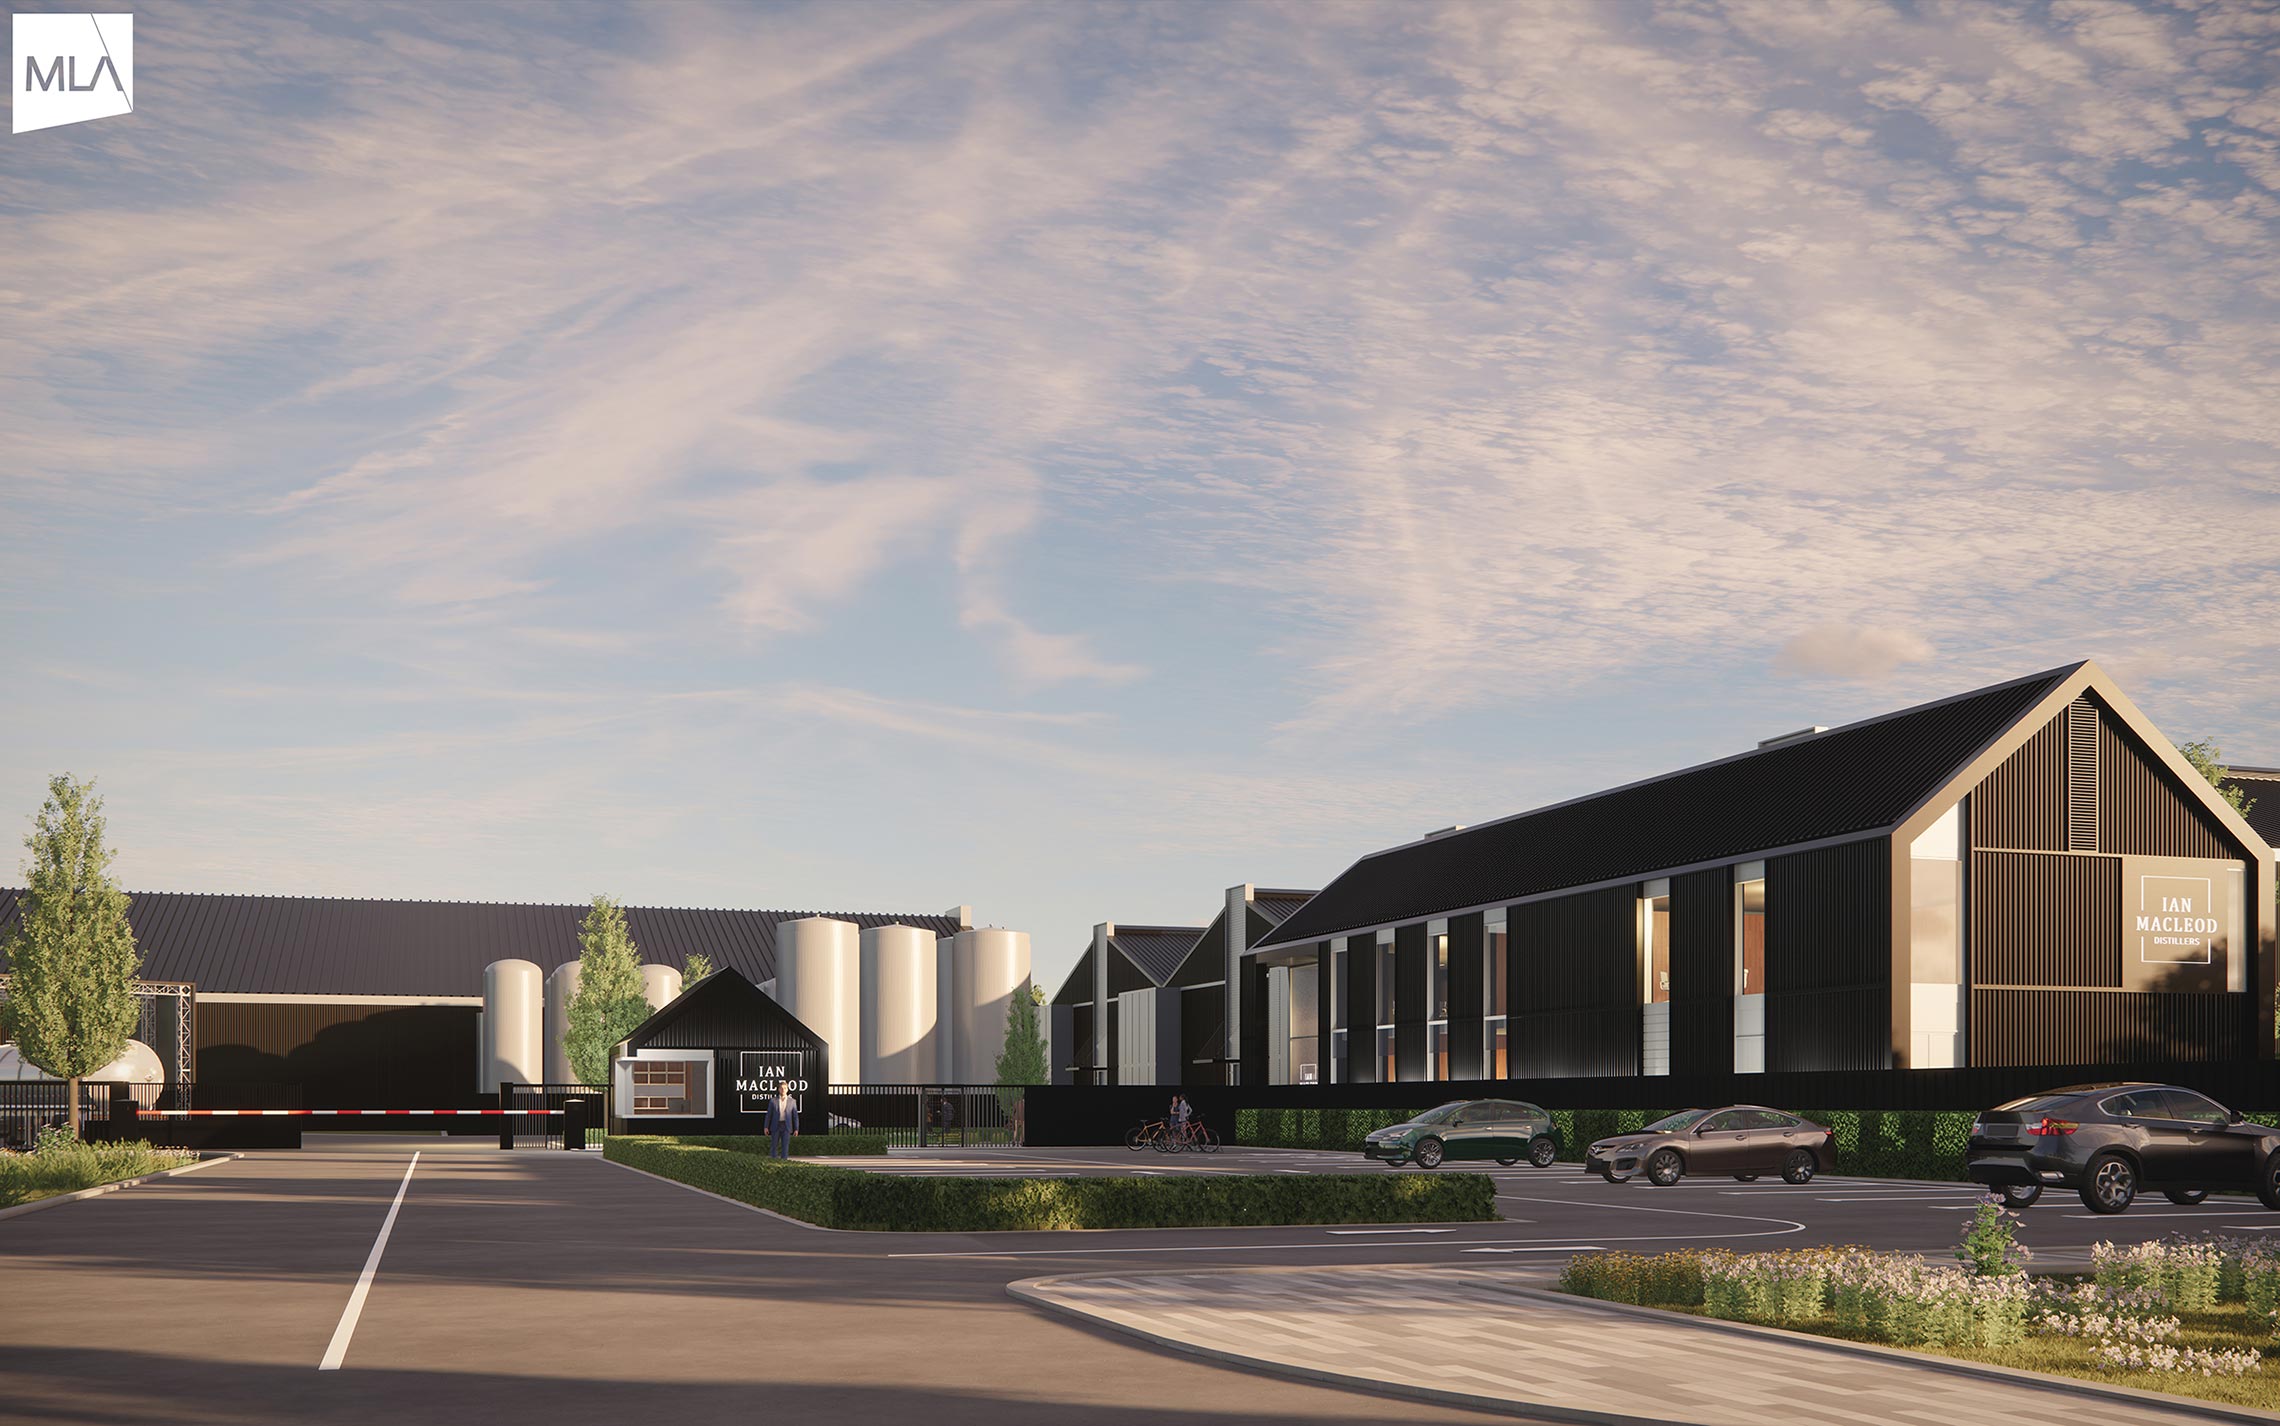 New whisky storage facility planned for Throsk